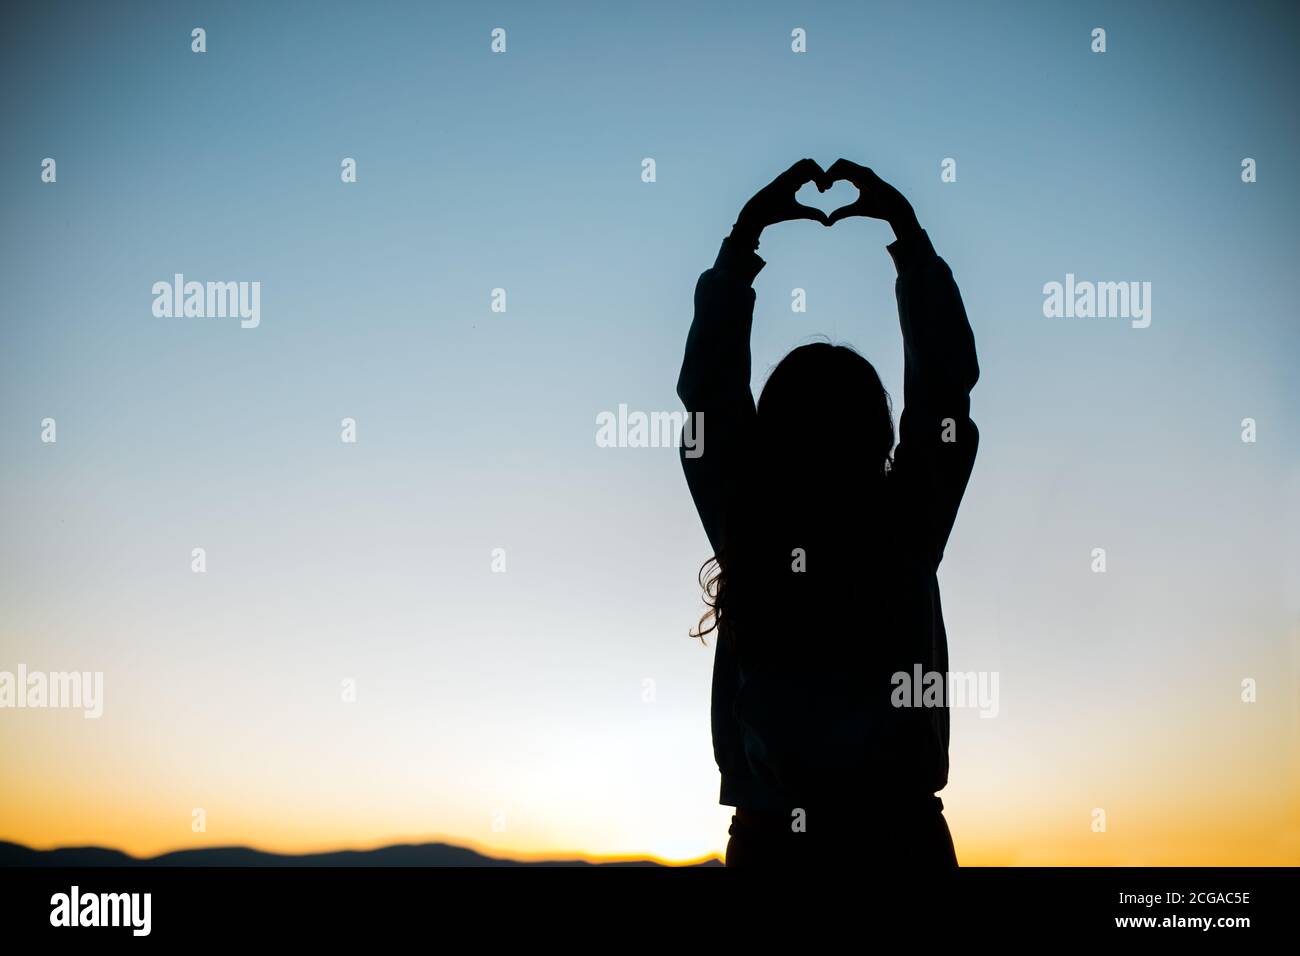 Hands form a Heart for Love Silhouette with Sunset or Sunrise Stock Photo